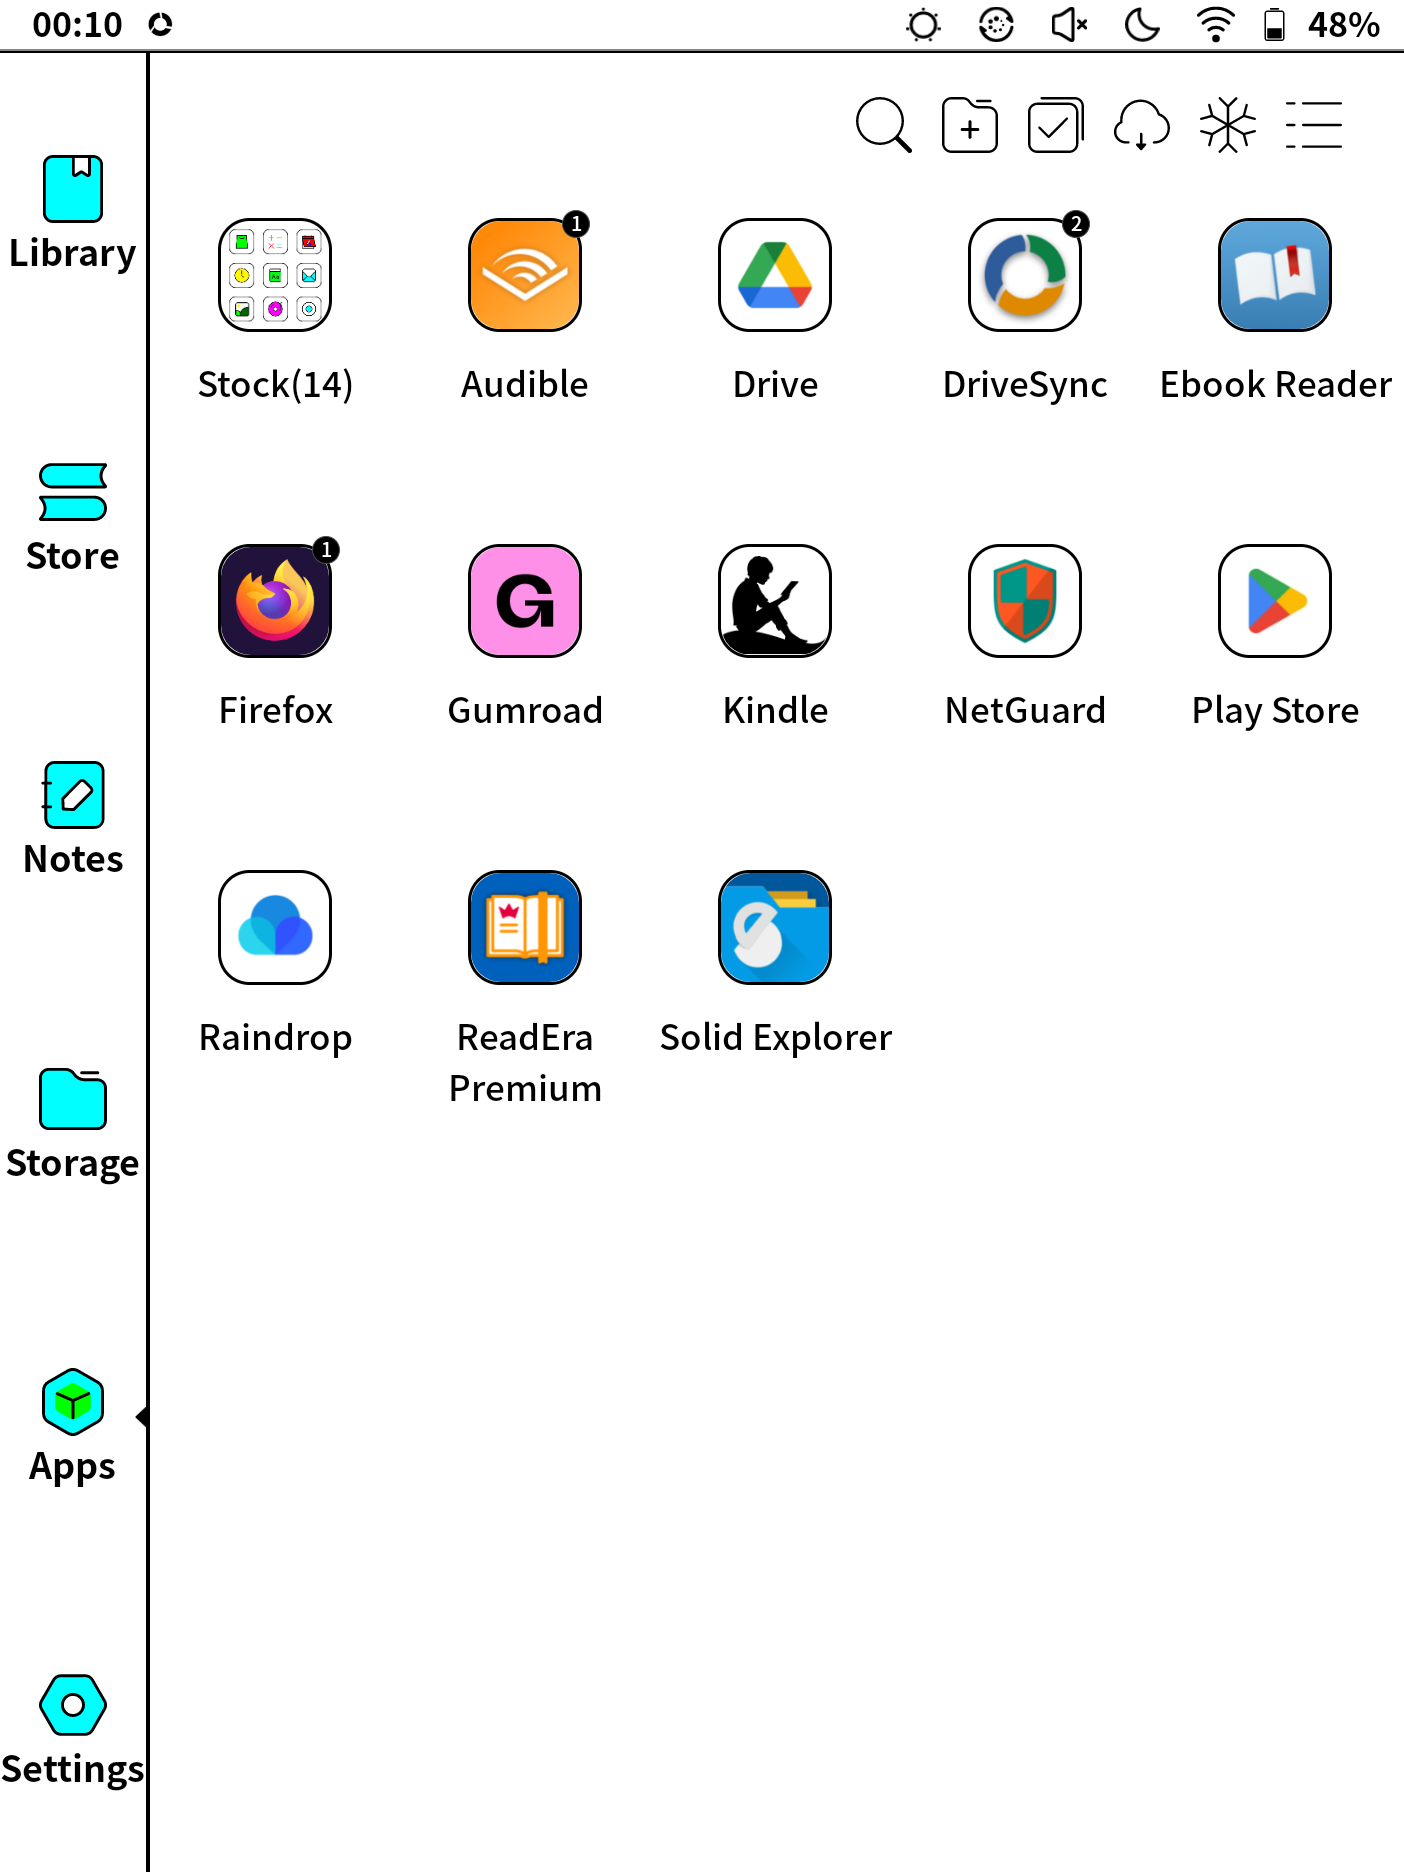 Homescreen with installed apps. From left to right and top to bottom: A folder called &ldquo;Stock&rdquo; with 14 items, Audible, Drive, DriveSync, Ebook Reader, Firefox, Gumroad, Kindle, NetGuard, Play Store, Raindrop, ReadEra Premium and Solid Explorer.